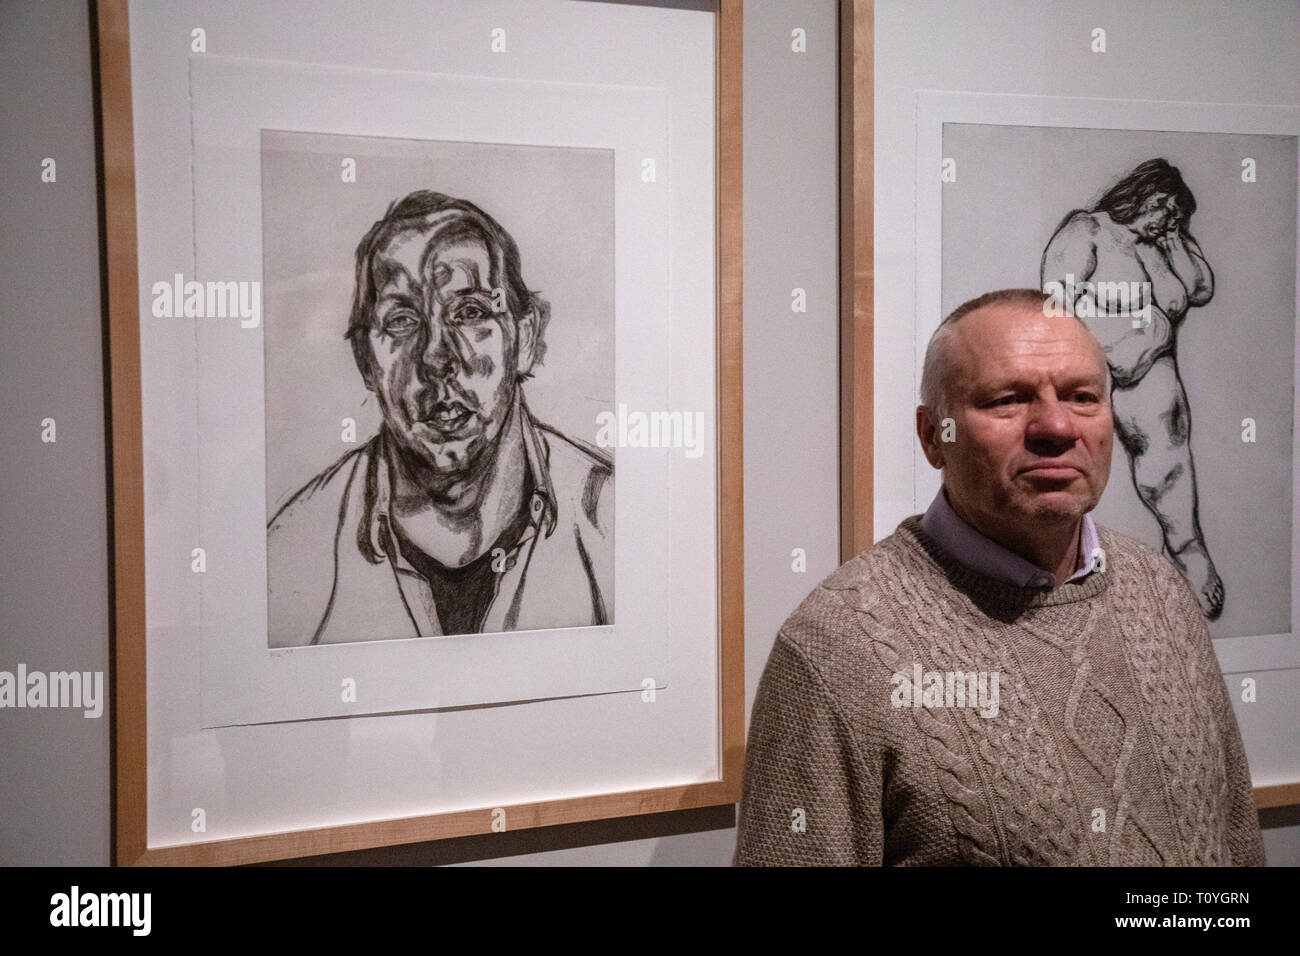 Moscow, Russia. 22nd Mar 2019/ Visitor takes pictures on the background of the painting 'David Dawson' of Lucian Freud in the Pushkin State Museum of Fine Arts during the exhibition “Francis Bacon, Lucian Freud, and the School of London.” in Moscow, Russia. The artworks provided by the Tate Gallery, London. Stock Photo